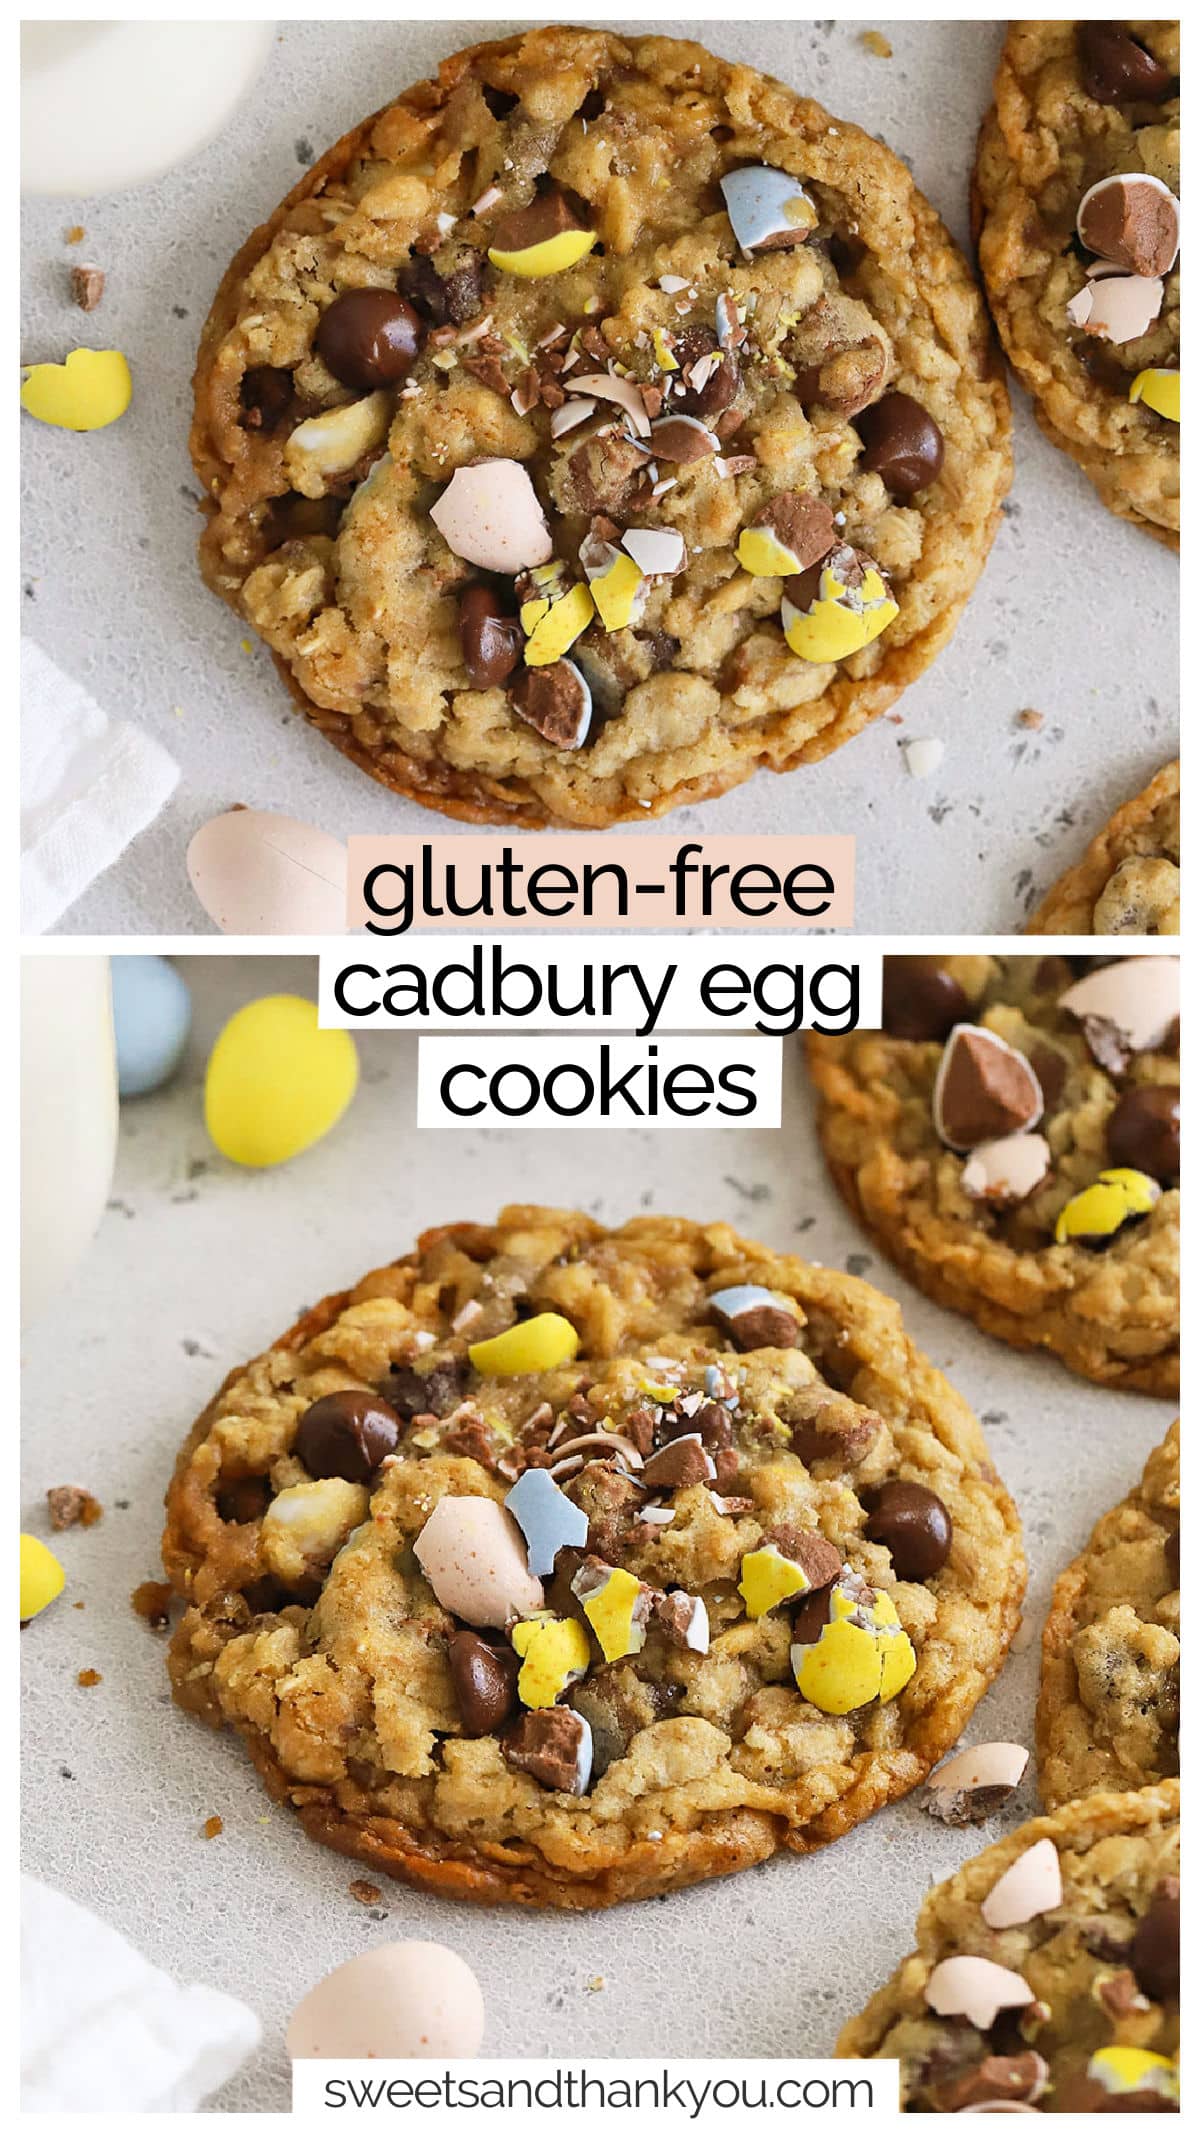 This Gluten-Free Cadbury Egg Cookies recipe is made with a chewy oatmeal cookie base, plenty of chocolate chips & Cadbury mini eggs in every bite! (So, basically, the perfect Easter cookie recipe!) If you need an easy gluten-free Easter dessert to try this year, these cookies are the PERFECT option. 